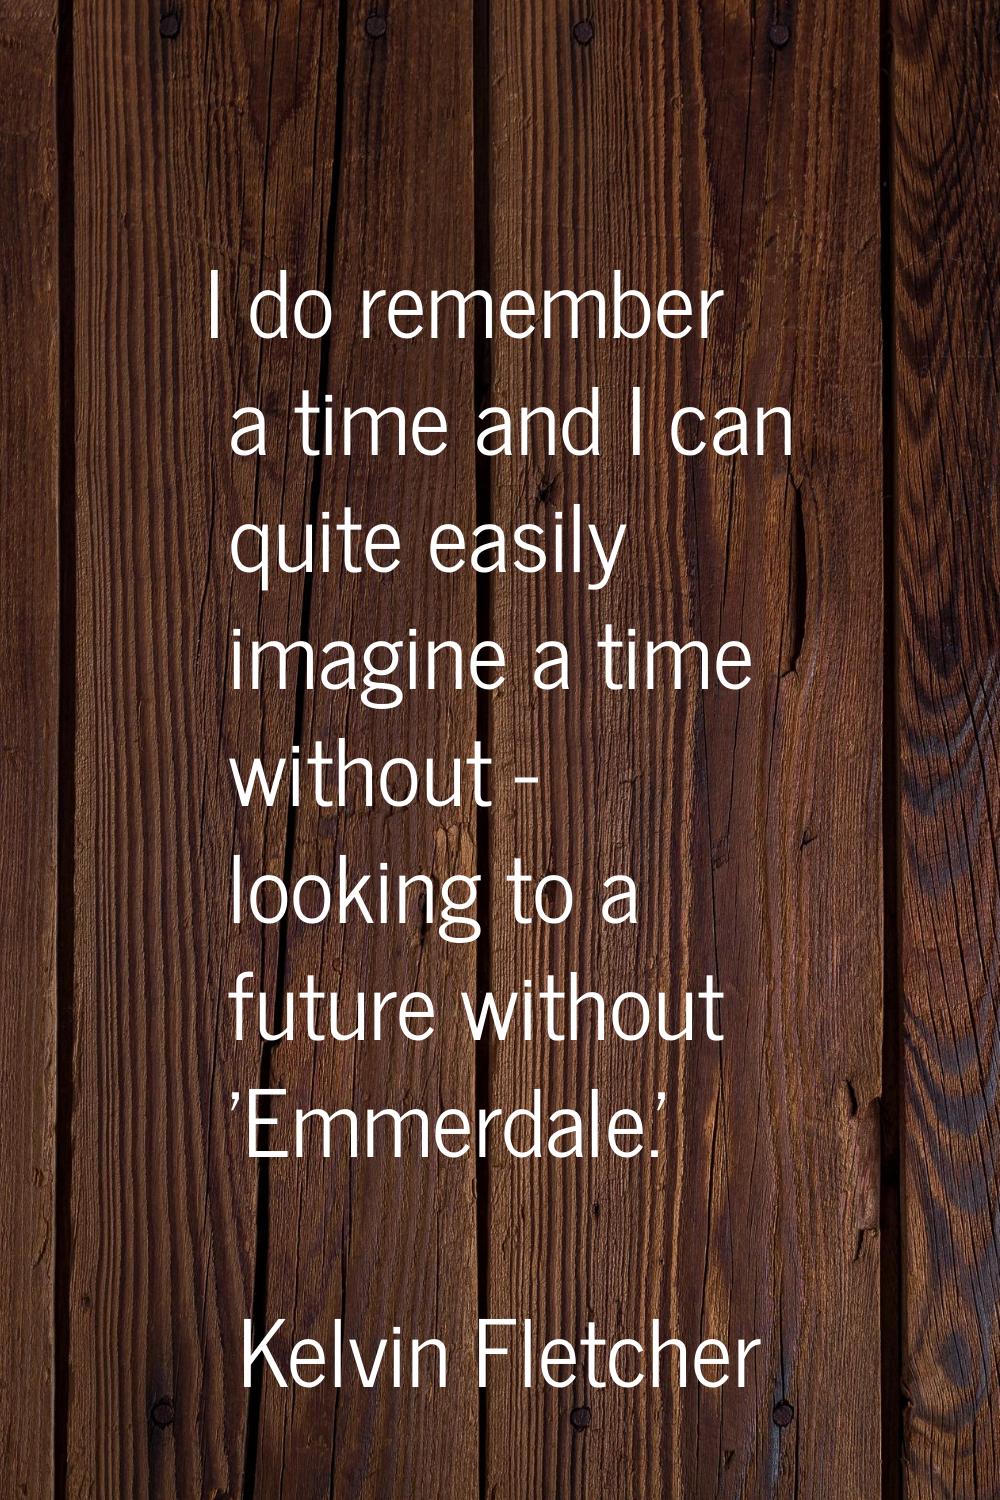 I do remember a time and I can quite easily imagine a time without - looking to a future without 'E